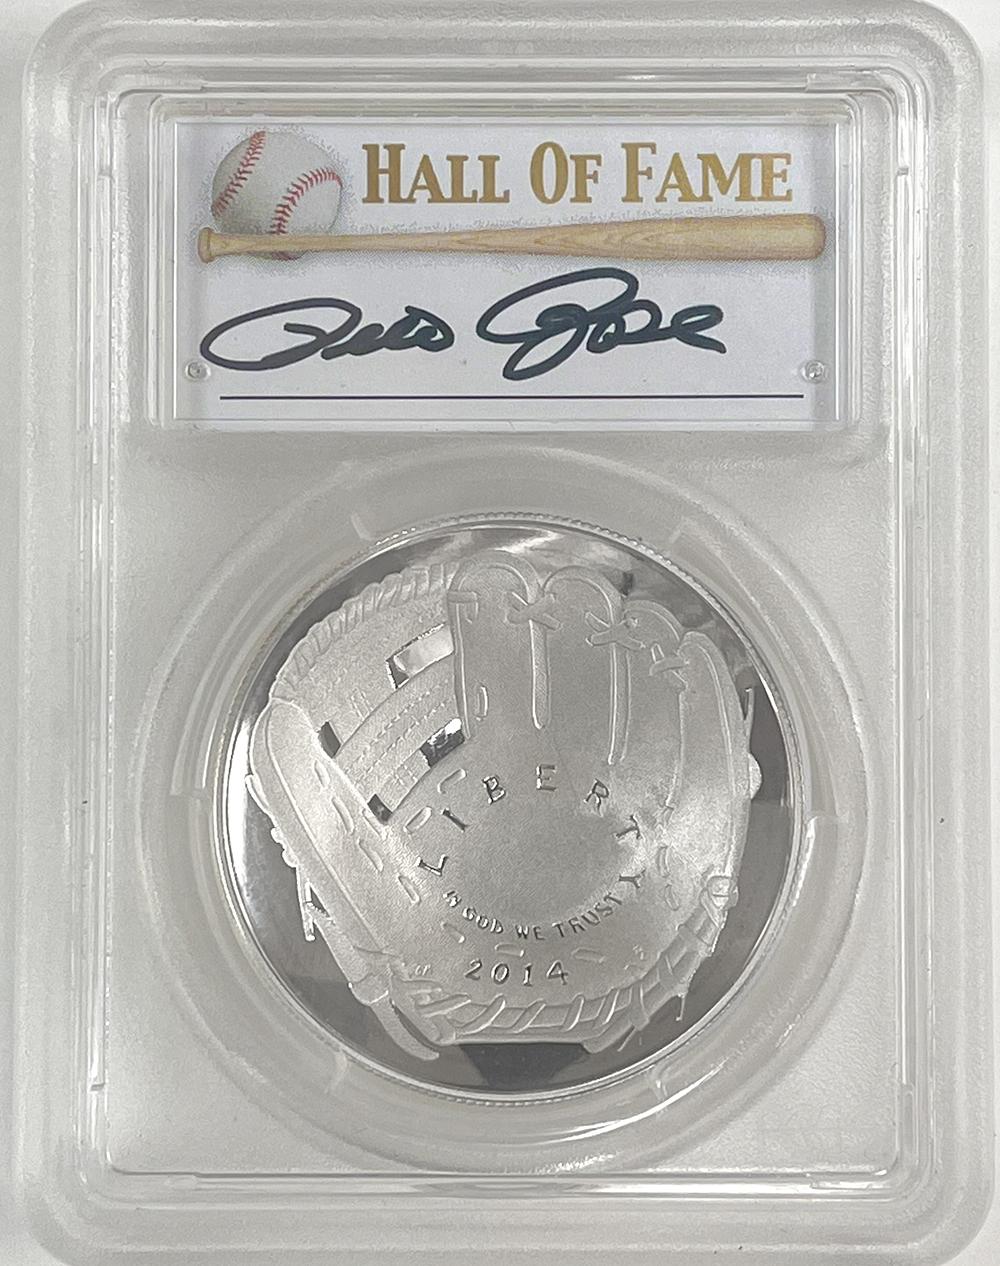 2014-P Commemorative Baseball Hall of Fame Silver Dollar, Signed by Pete Rose, NGC Certified in PR70 Deep Cameo (DCAM)